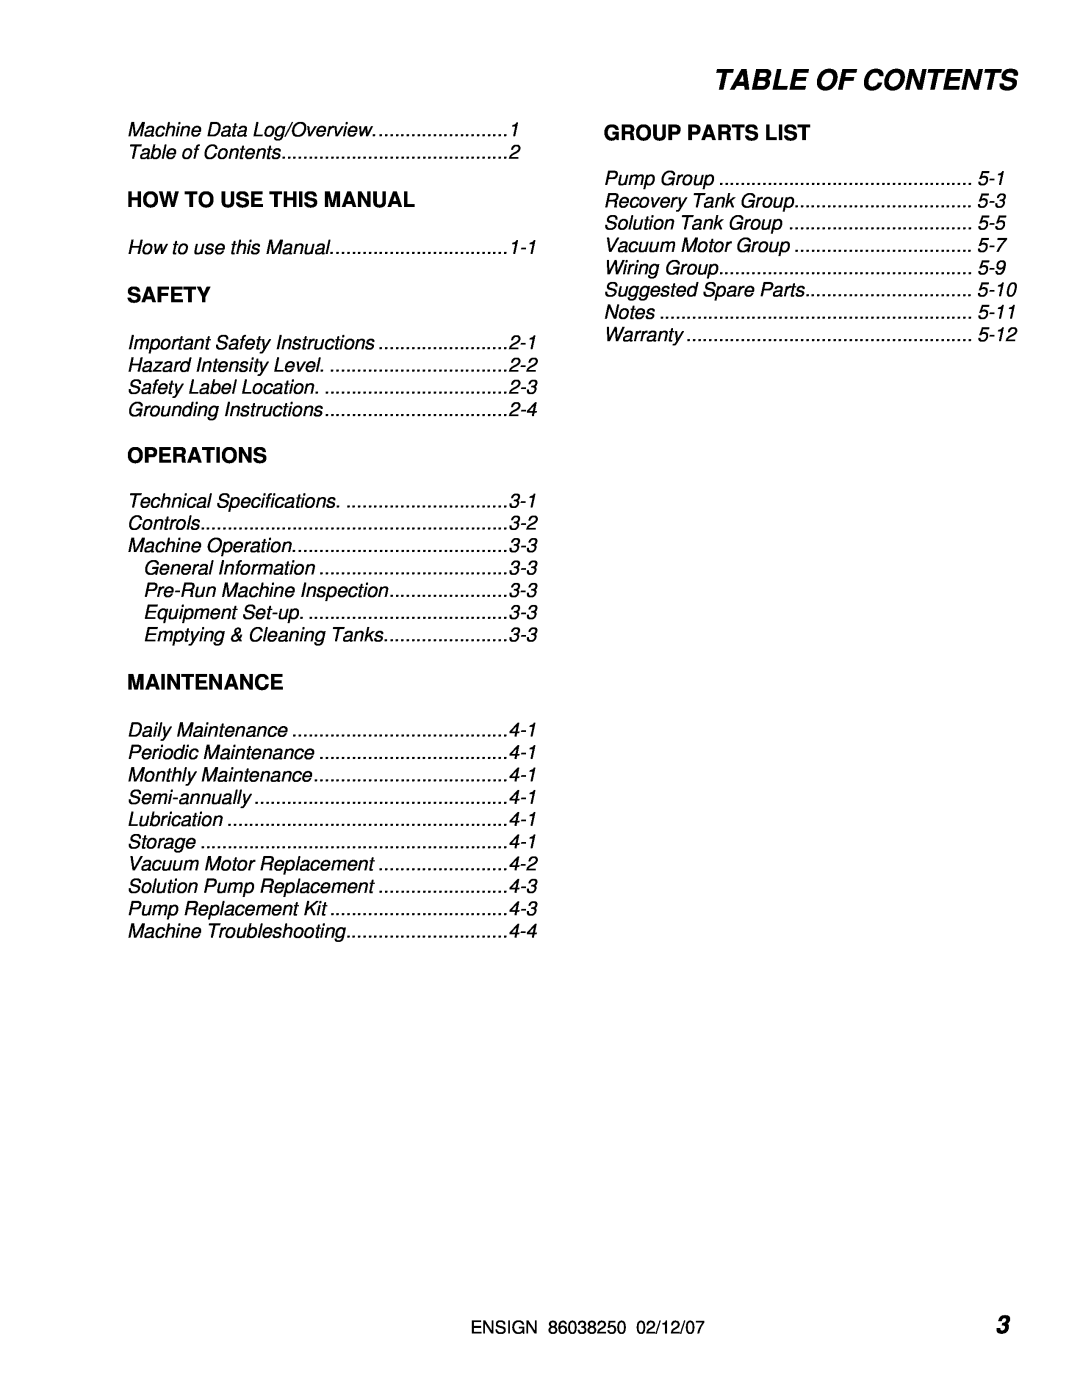 Windsor E50 10070090 Table Of Contents, How To Use This Manual, Safety, Operations, Maintenance, Group Parts List 